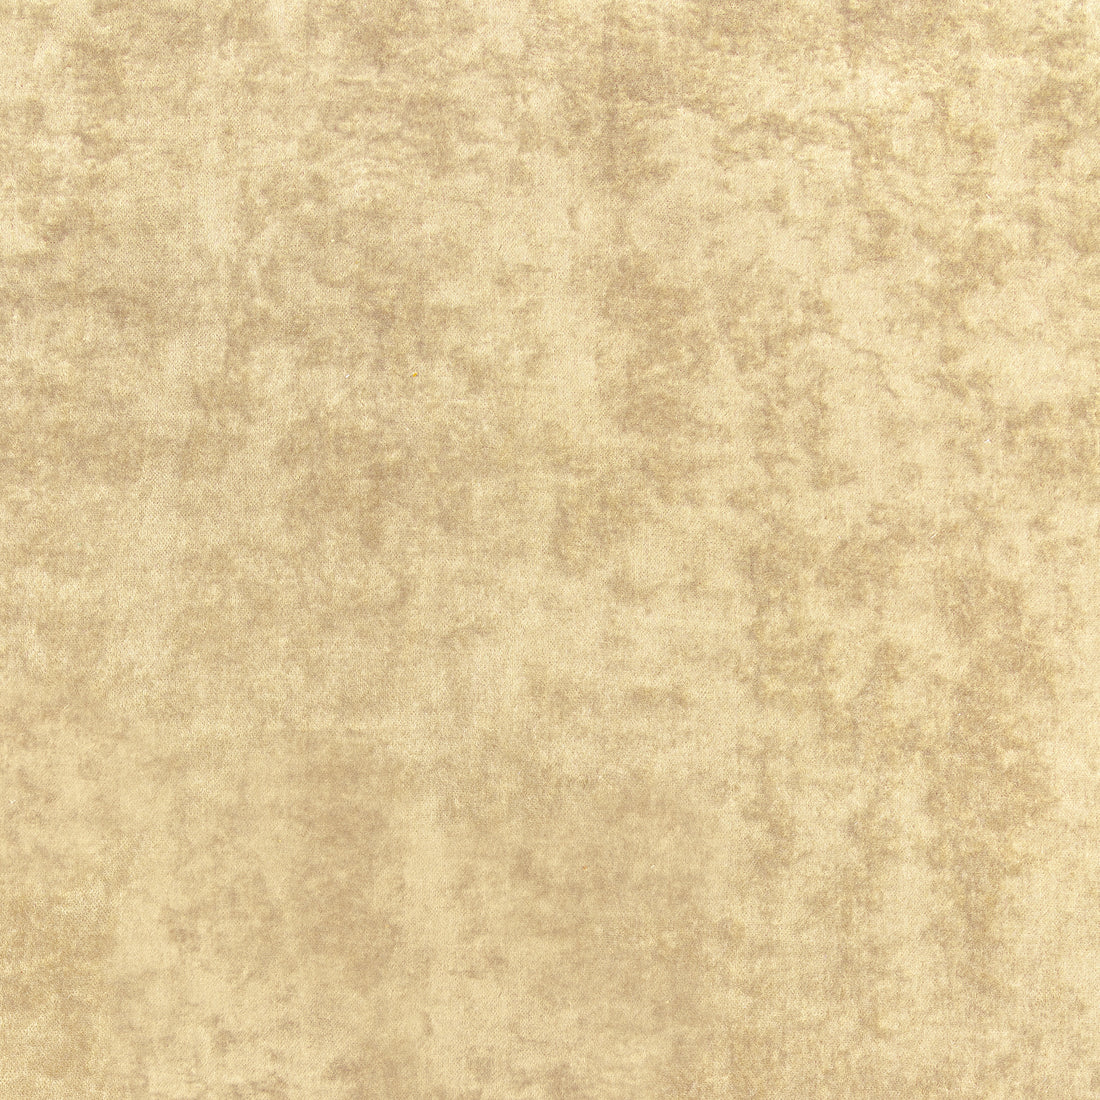 Celeste Velvet fabric in camel color - pattern number W8968 - by Thibaut in the Lyra Velvets collection